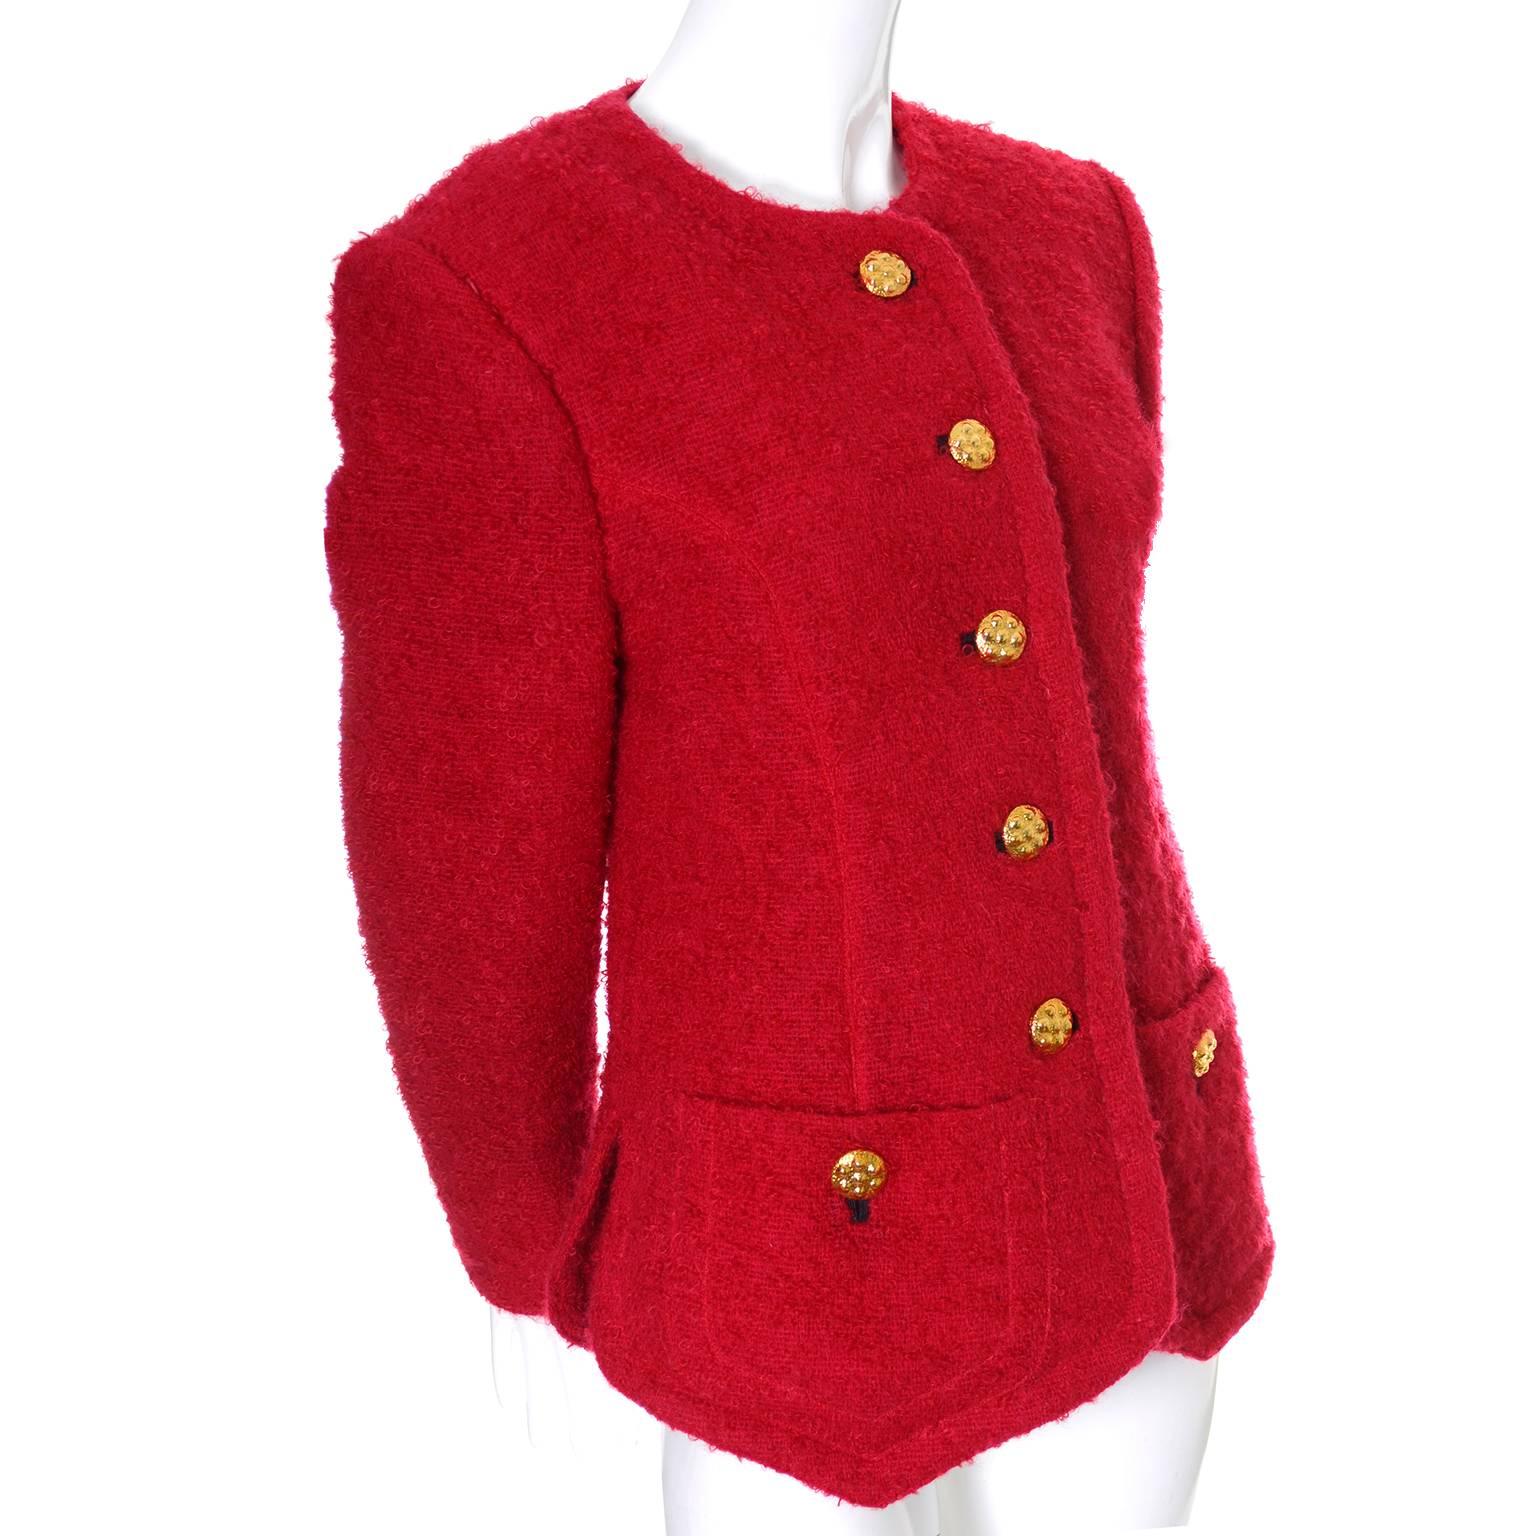 This vintage red boucle wool blazer was designed by Yves Saint Laurent in the late 1980's or early 1990s. The jacket is fully lined and has beautiful buttons and front pockets.  This piece comes from a collection of YSL vintage clothing that I